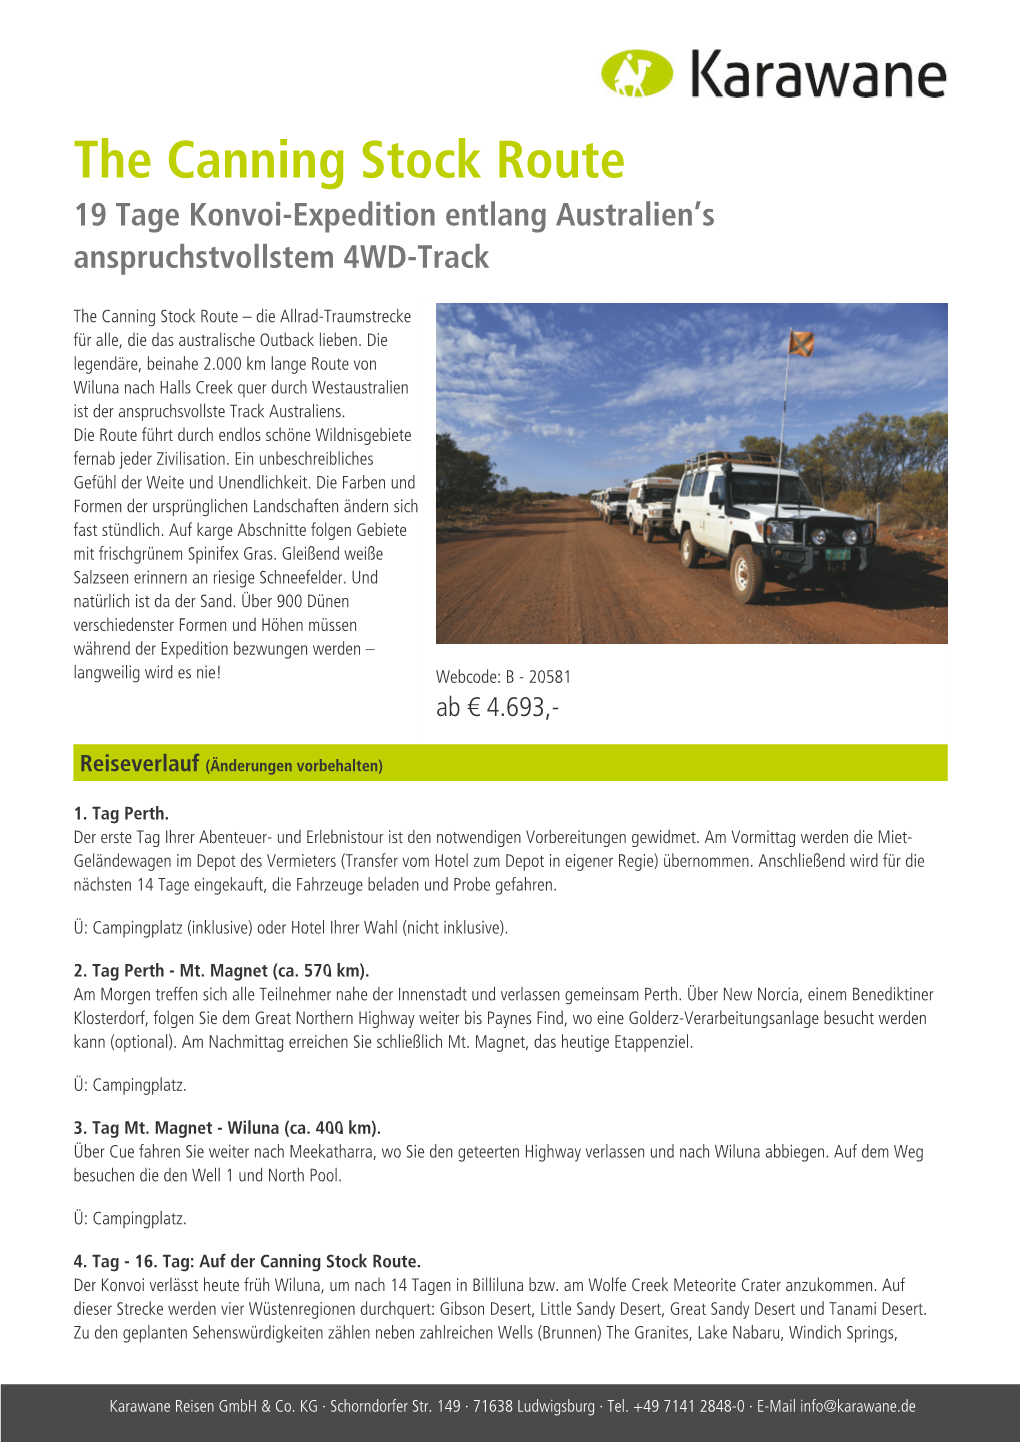 The Canning Stock Route 19 Tage Konvoi-Expedition Entlang Australien’S Anspruchstvollstem 4WD-Track